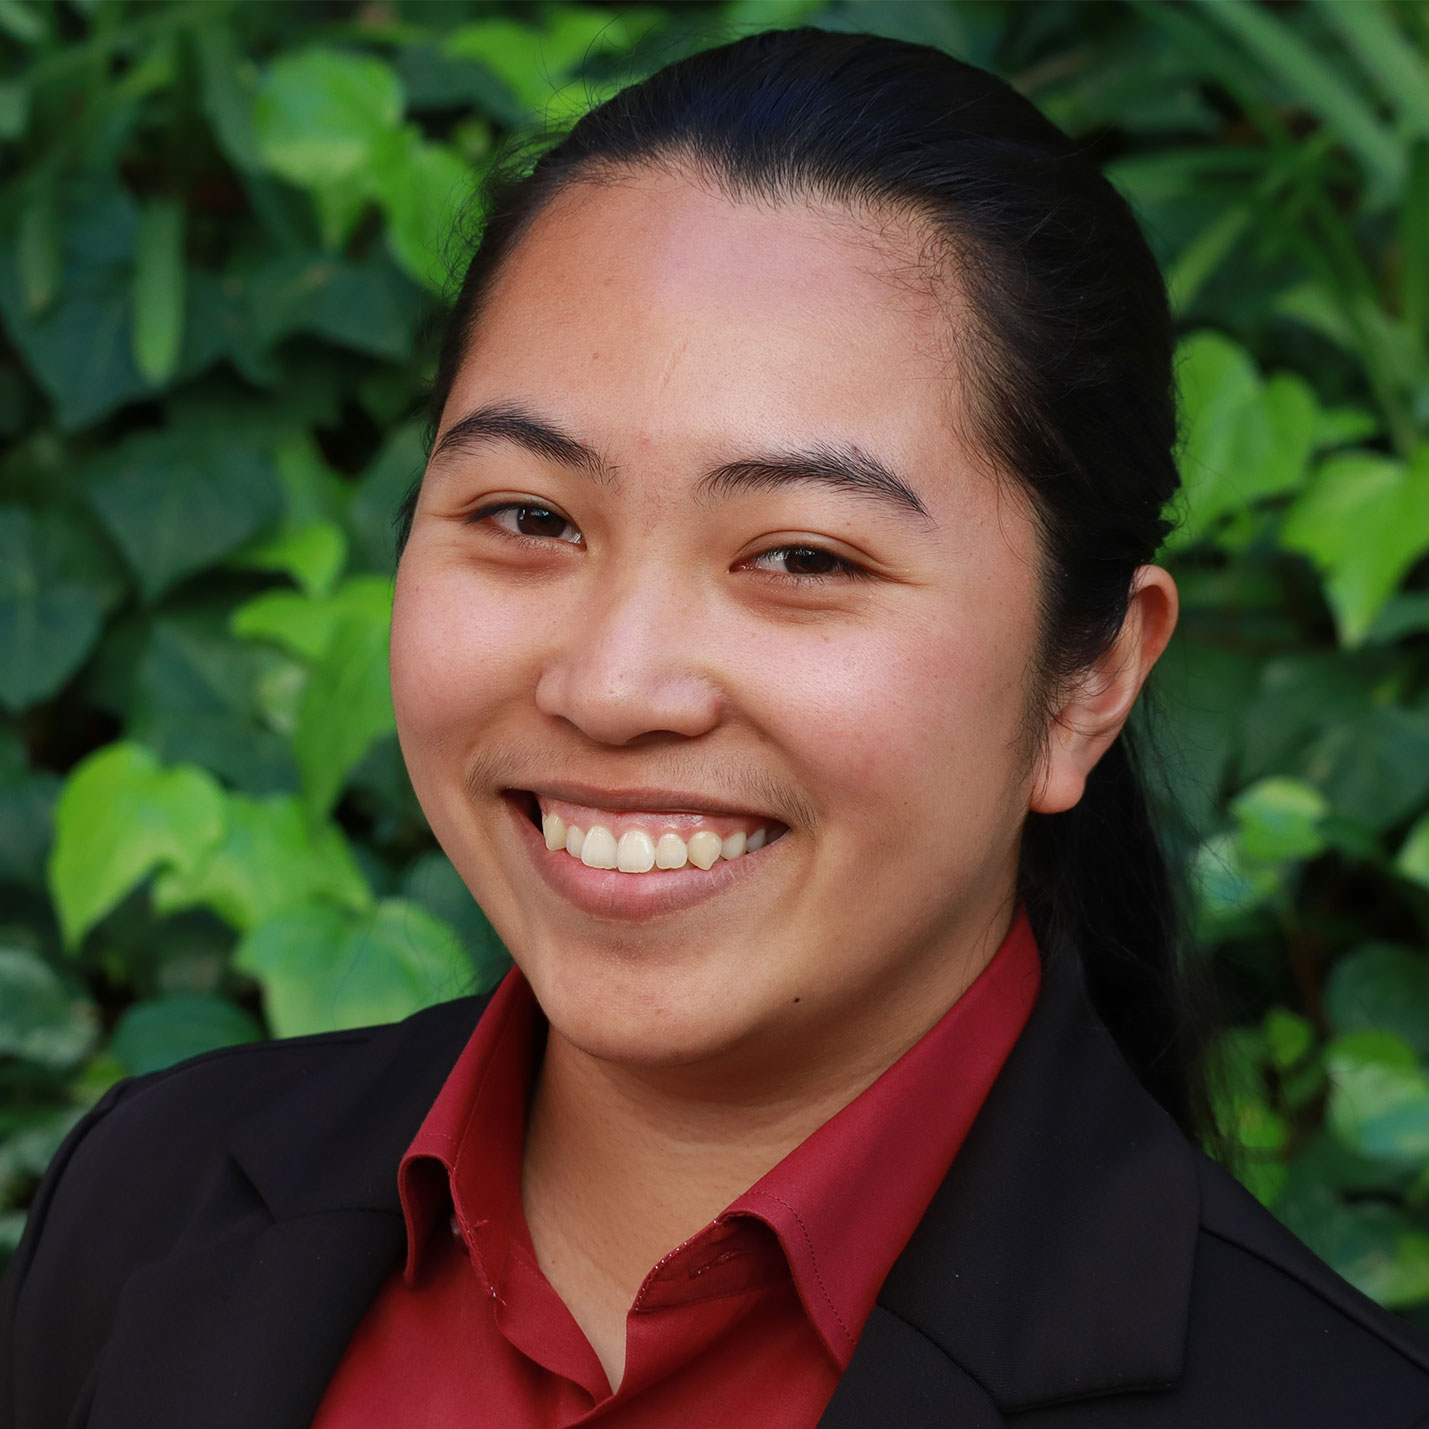 Headshot of scholar. Green plants behind scholar. Scholar has black hair that is pulled back in a pony tail. Has thick eyebrows. Wearing a black dress coat with a red button up shirt underneath. Is smiling big with teeth.